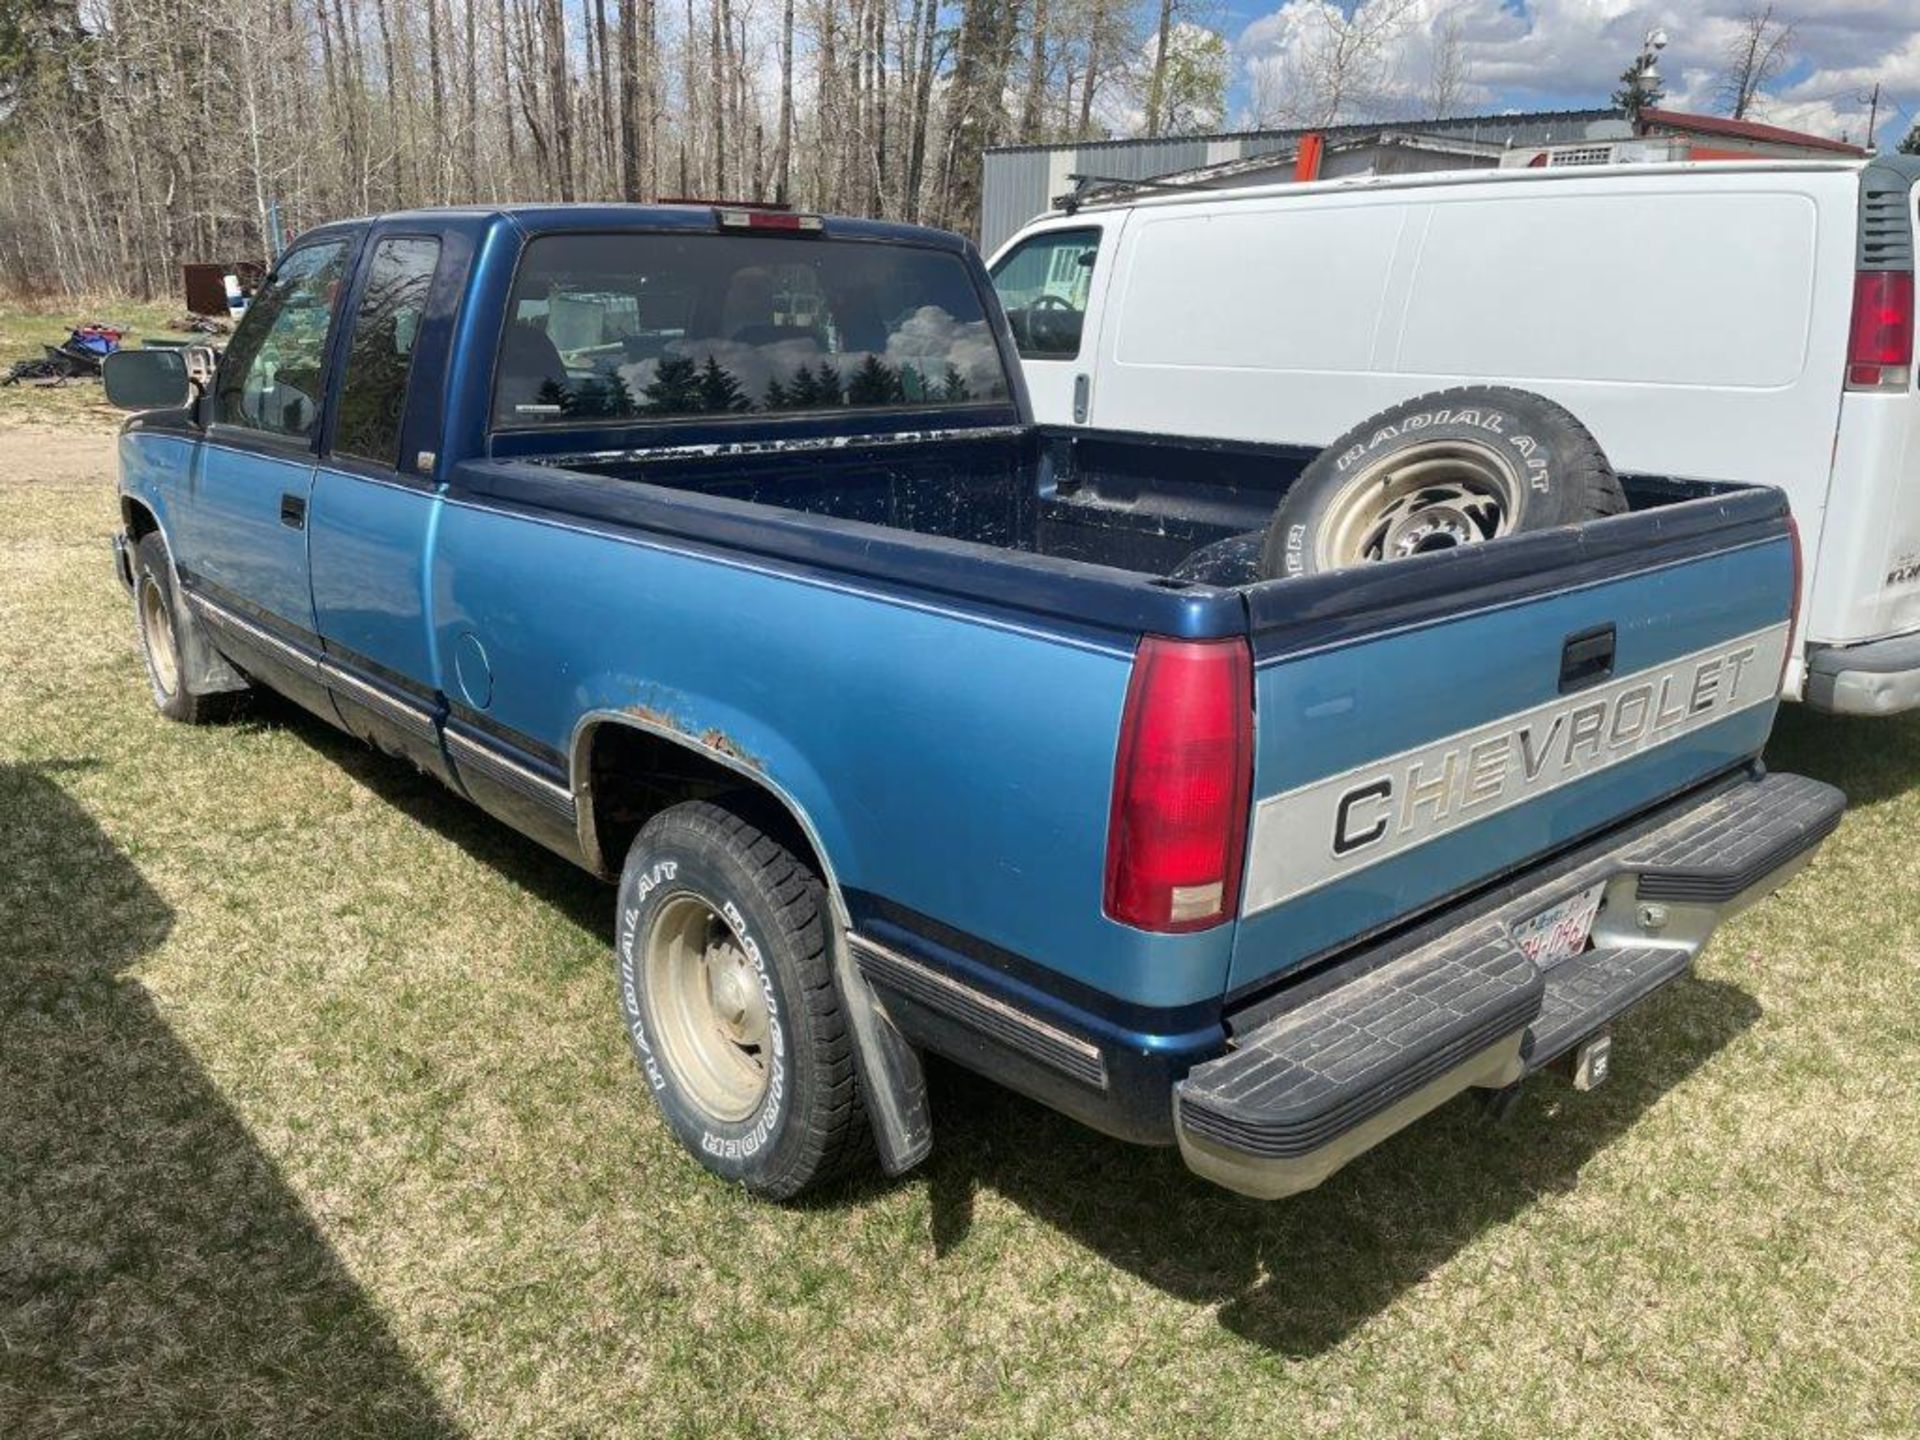 1993 CHEVROLET 1500 EXTENDED CAB PICK UP TRUCK W/ 6FT BOX, 5.7L GAS ENGINE, 250,180KM SHOWING, S/N - Image 4 of 6